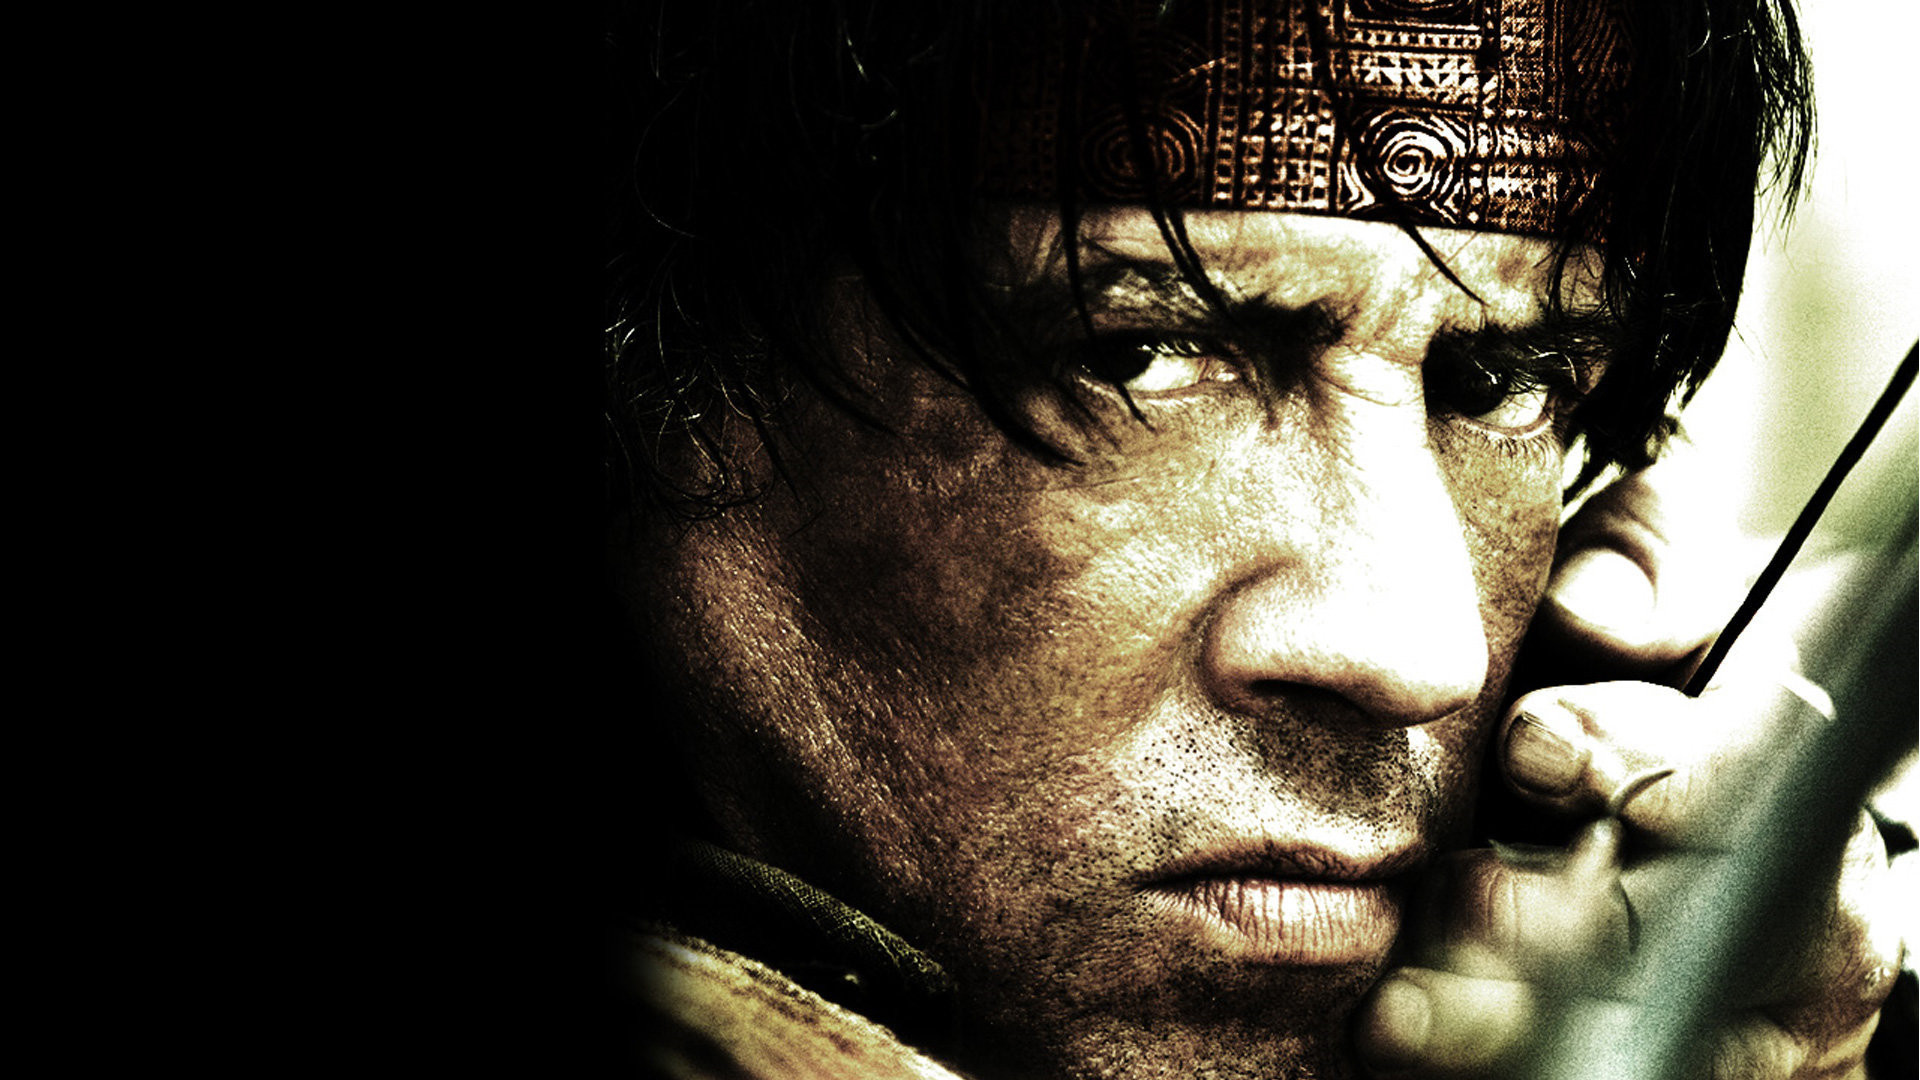 1920x1080 Wallpaper Of Star: The Most Popular Action Star – Sylvester Stallone .